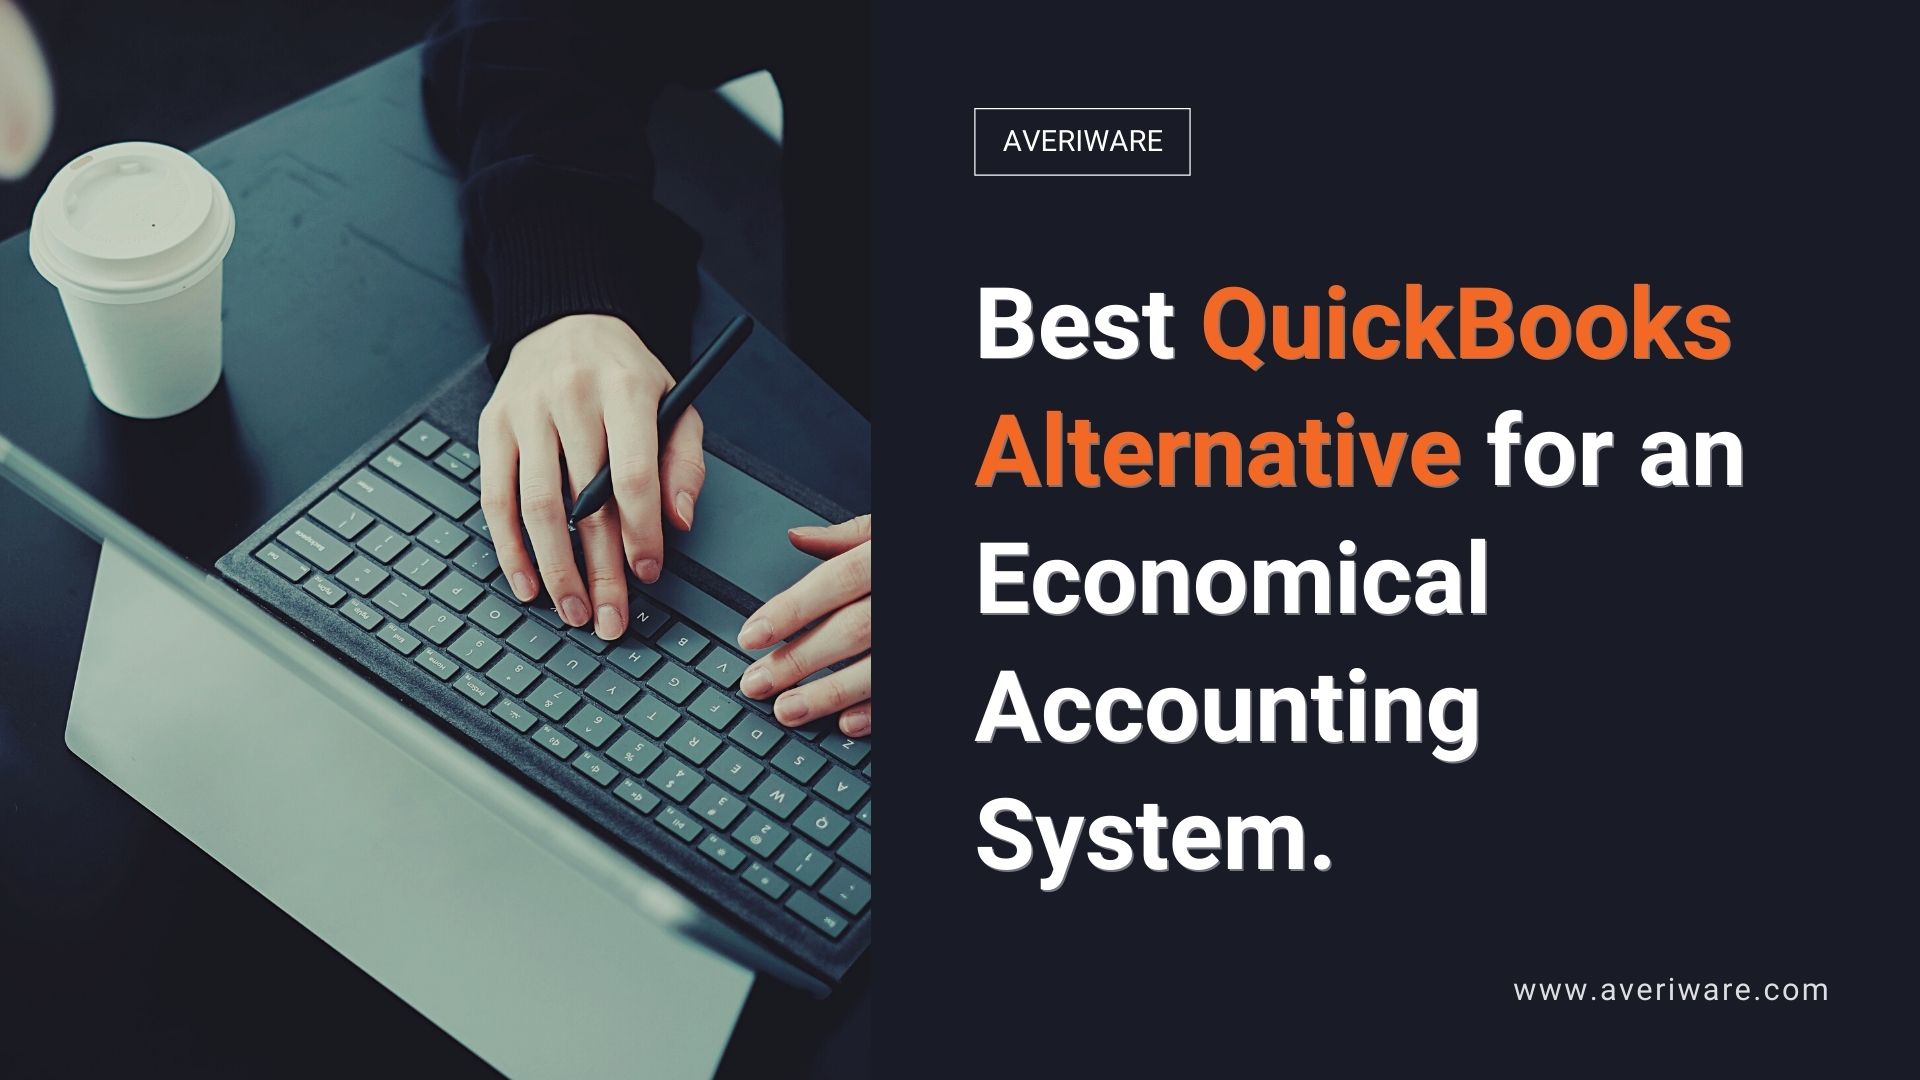 Best QuickBooks Alternative for an Economical Accounting System